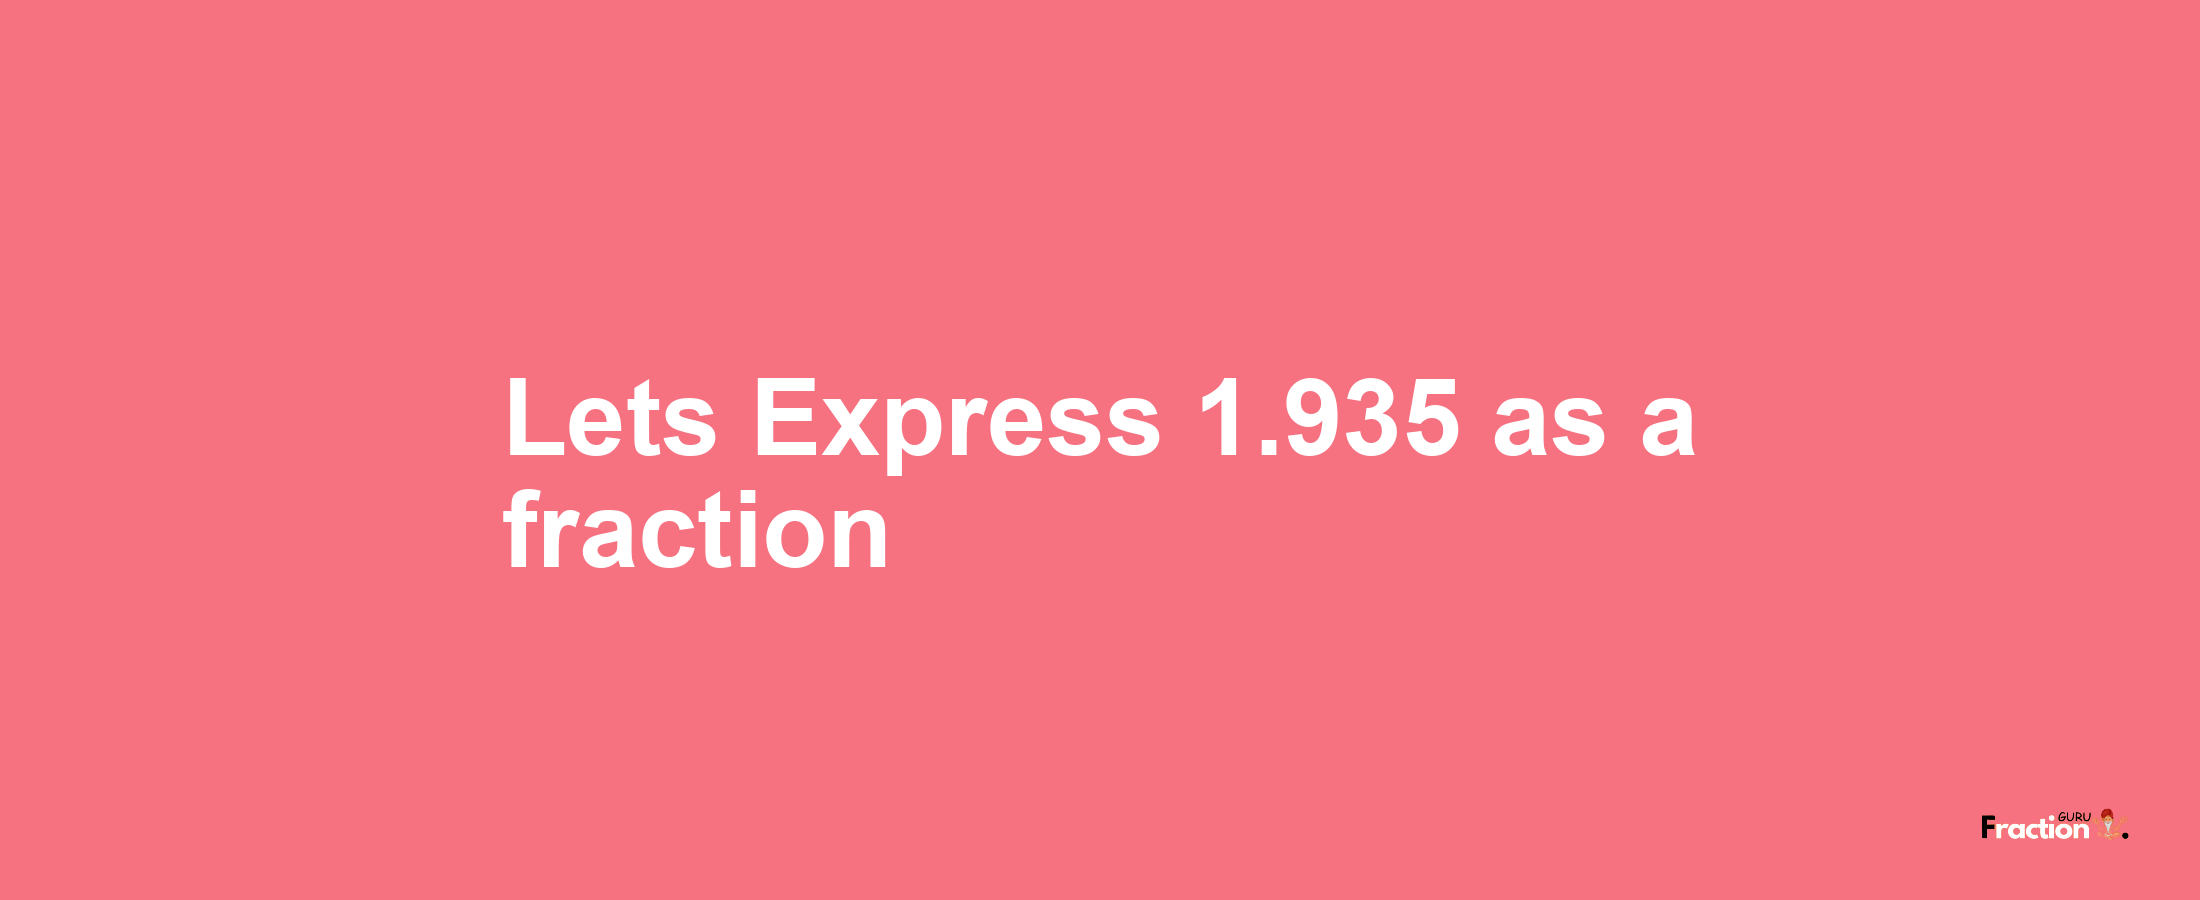 Lets Express 1.935 as afraction